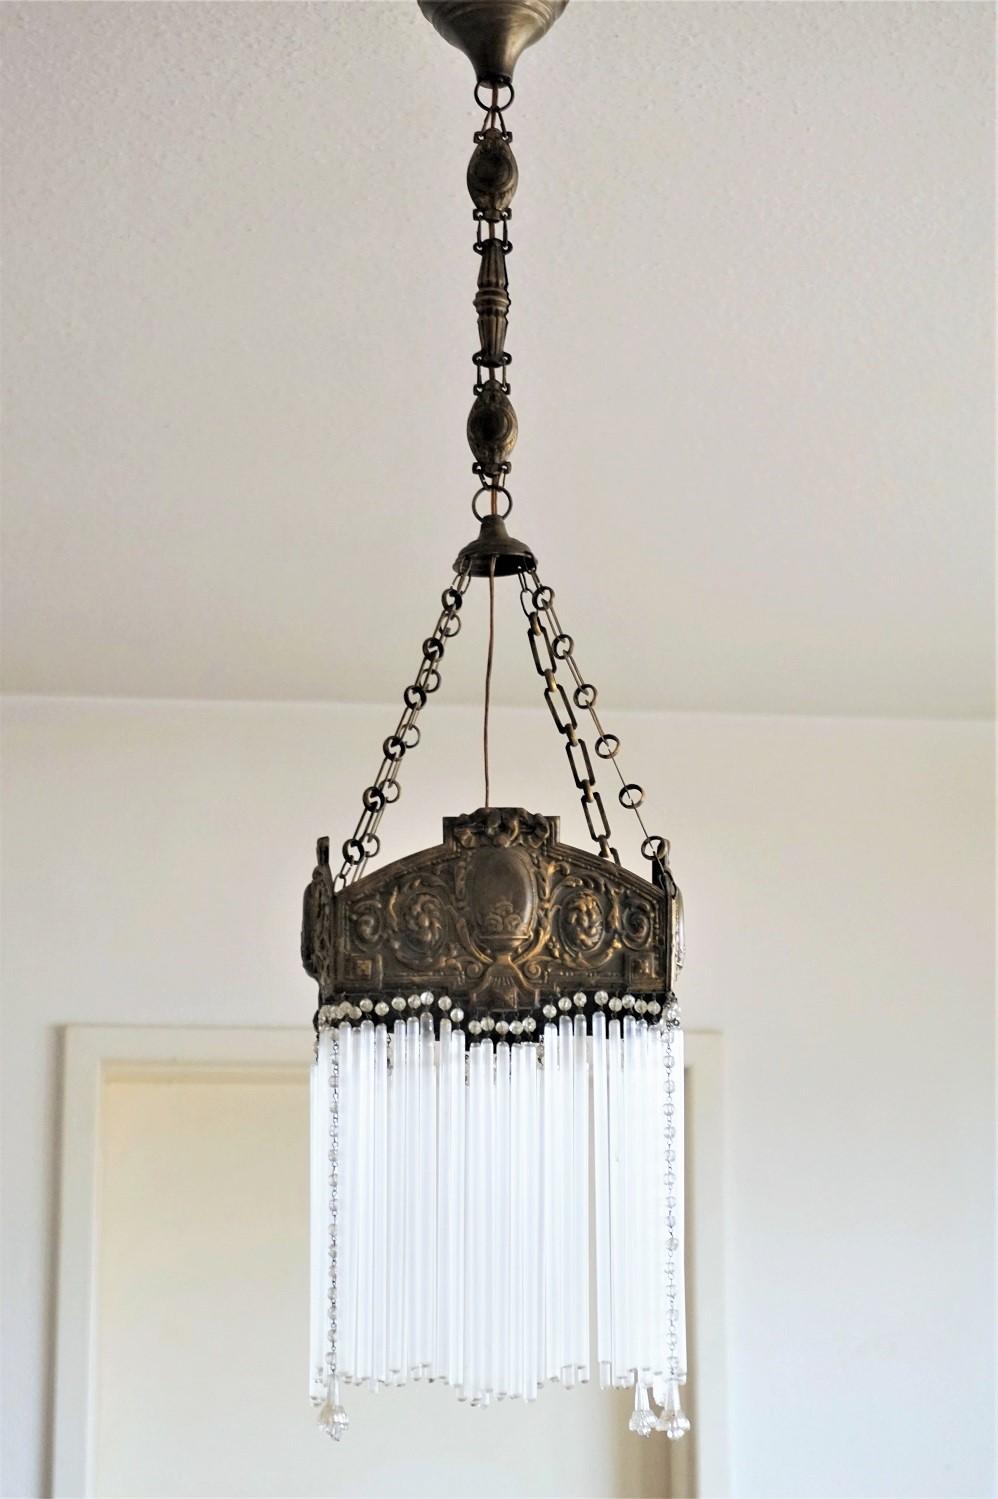 A lovely Art Nouveau chandelier, France, circa 1900-1910. Brass body decorated with handcrafted high relief details, long glass rods and glass pearls.
Very good condition, brass with beautiful patina, rods are complete.
Fully functional: European